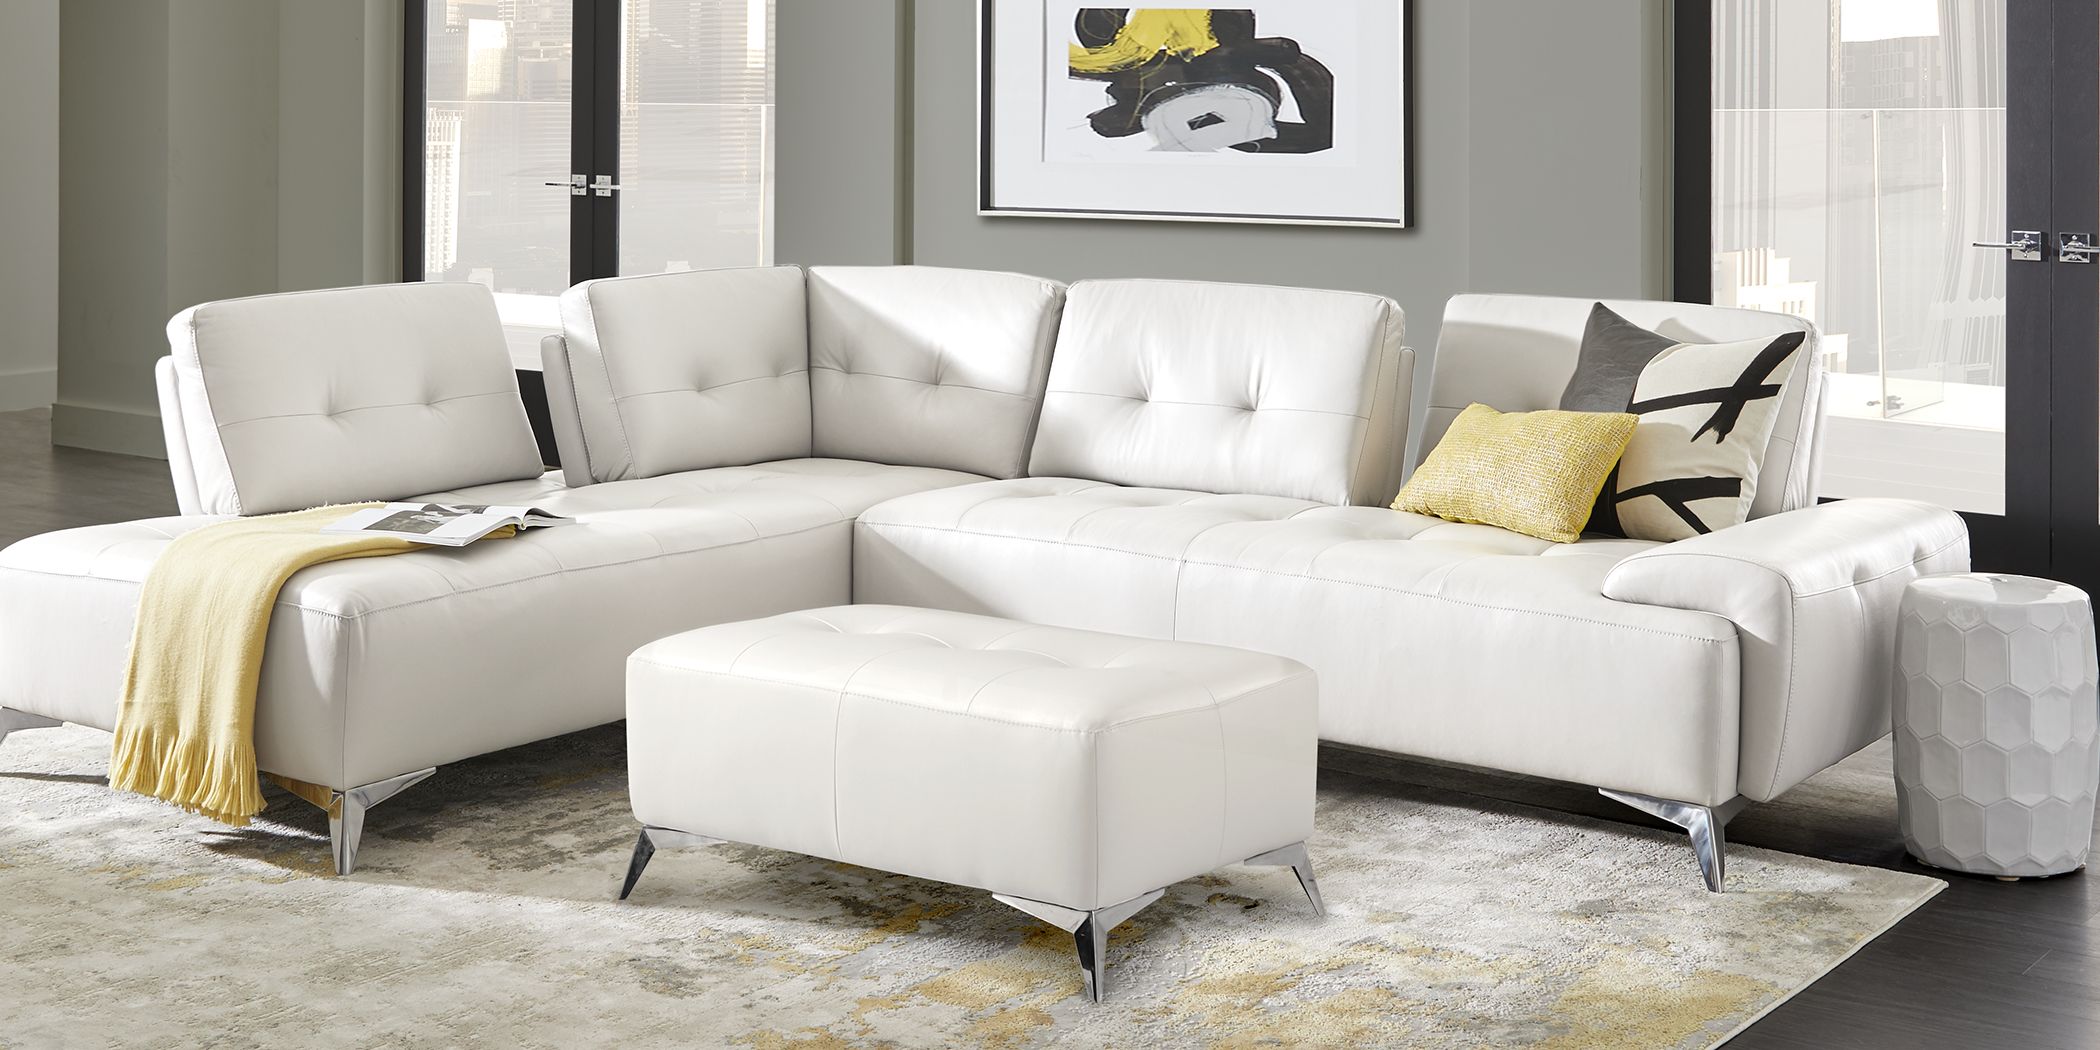 Cheap White Leather Living Room Sets